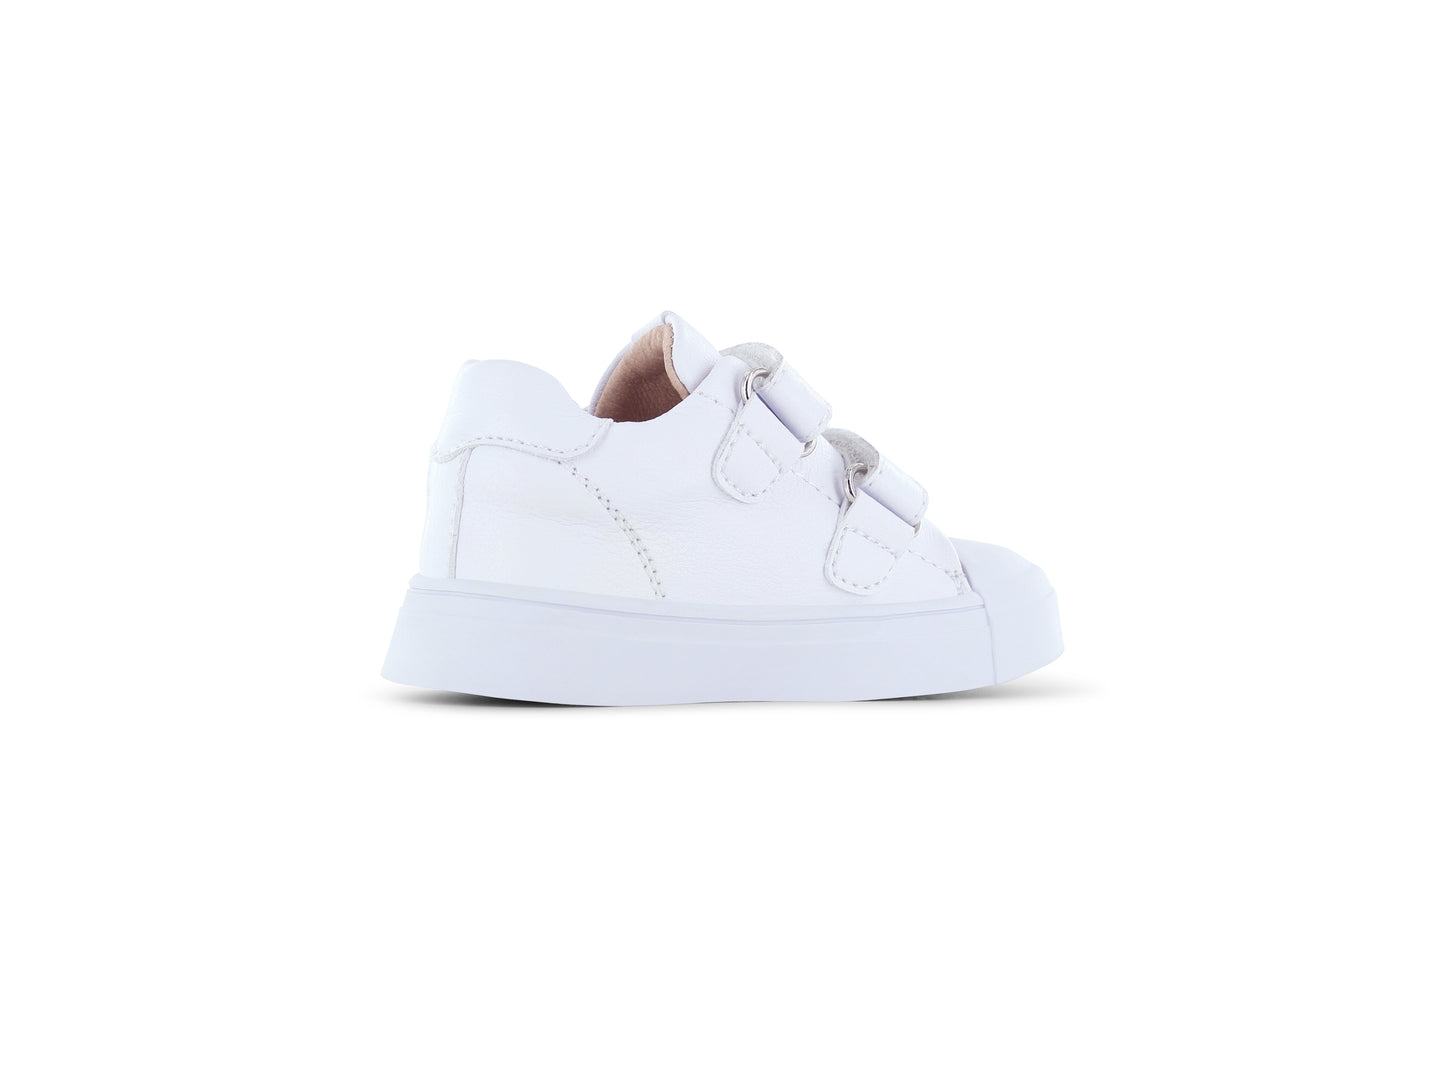 A chunky girl's trainer by Shoesme, style SH24S005-C, in white leather with grey panels to side.
Double velcro fastening.
Left side angled view.